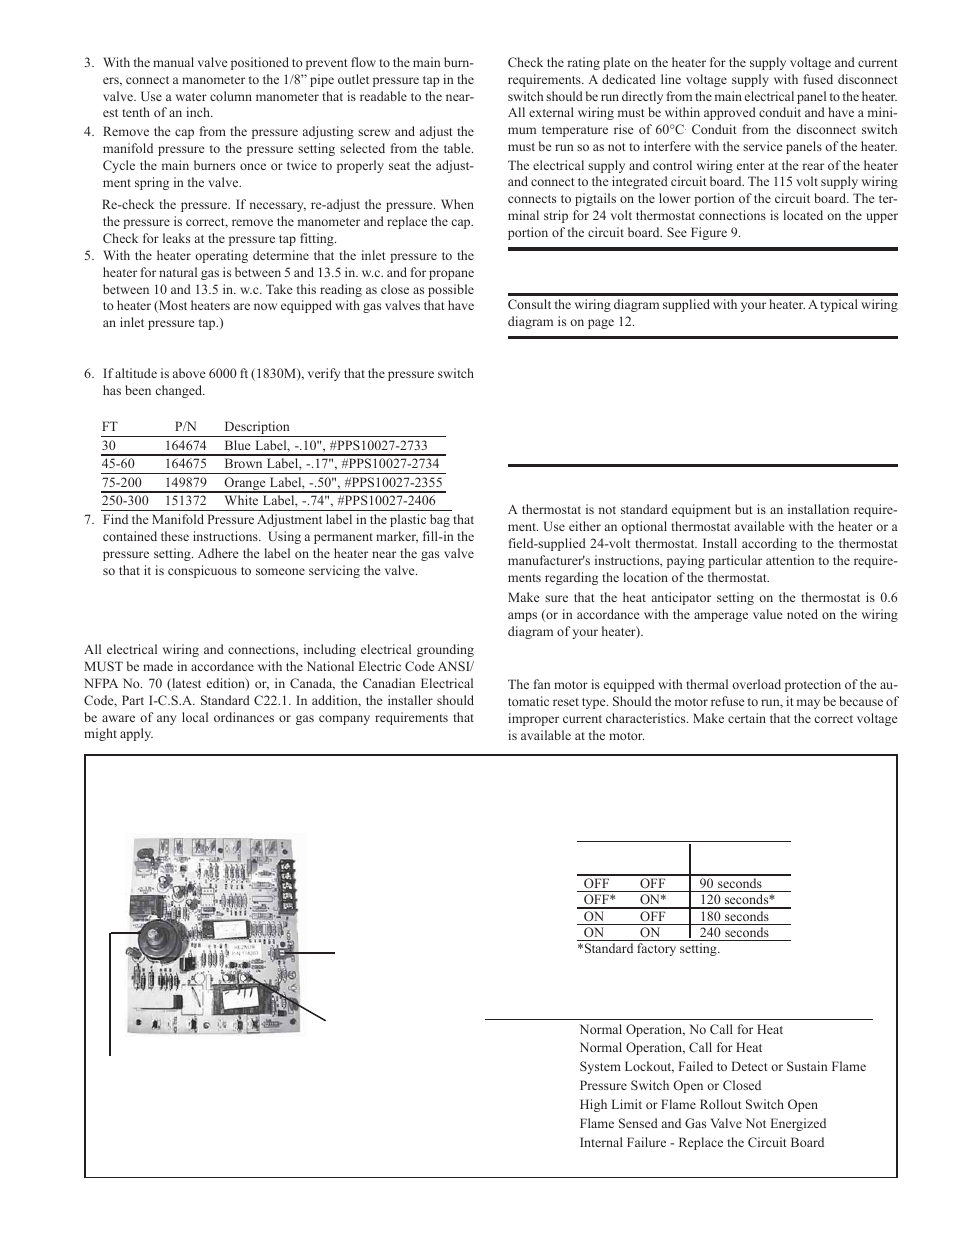 Electrical supply and connections, Thermostat and connections, Fan motor |  Reznor FT Unit Installation Manual User Manual | Page 12 / 21  Wiring Diagram Override Thermostat Reznor Ag3    Manuals Directory